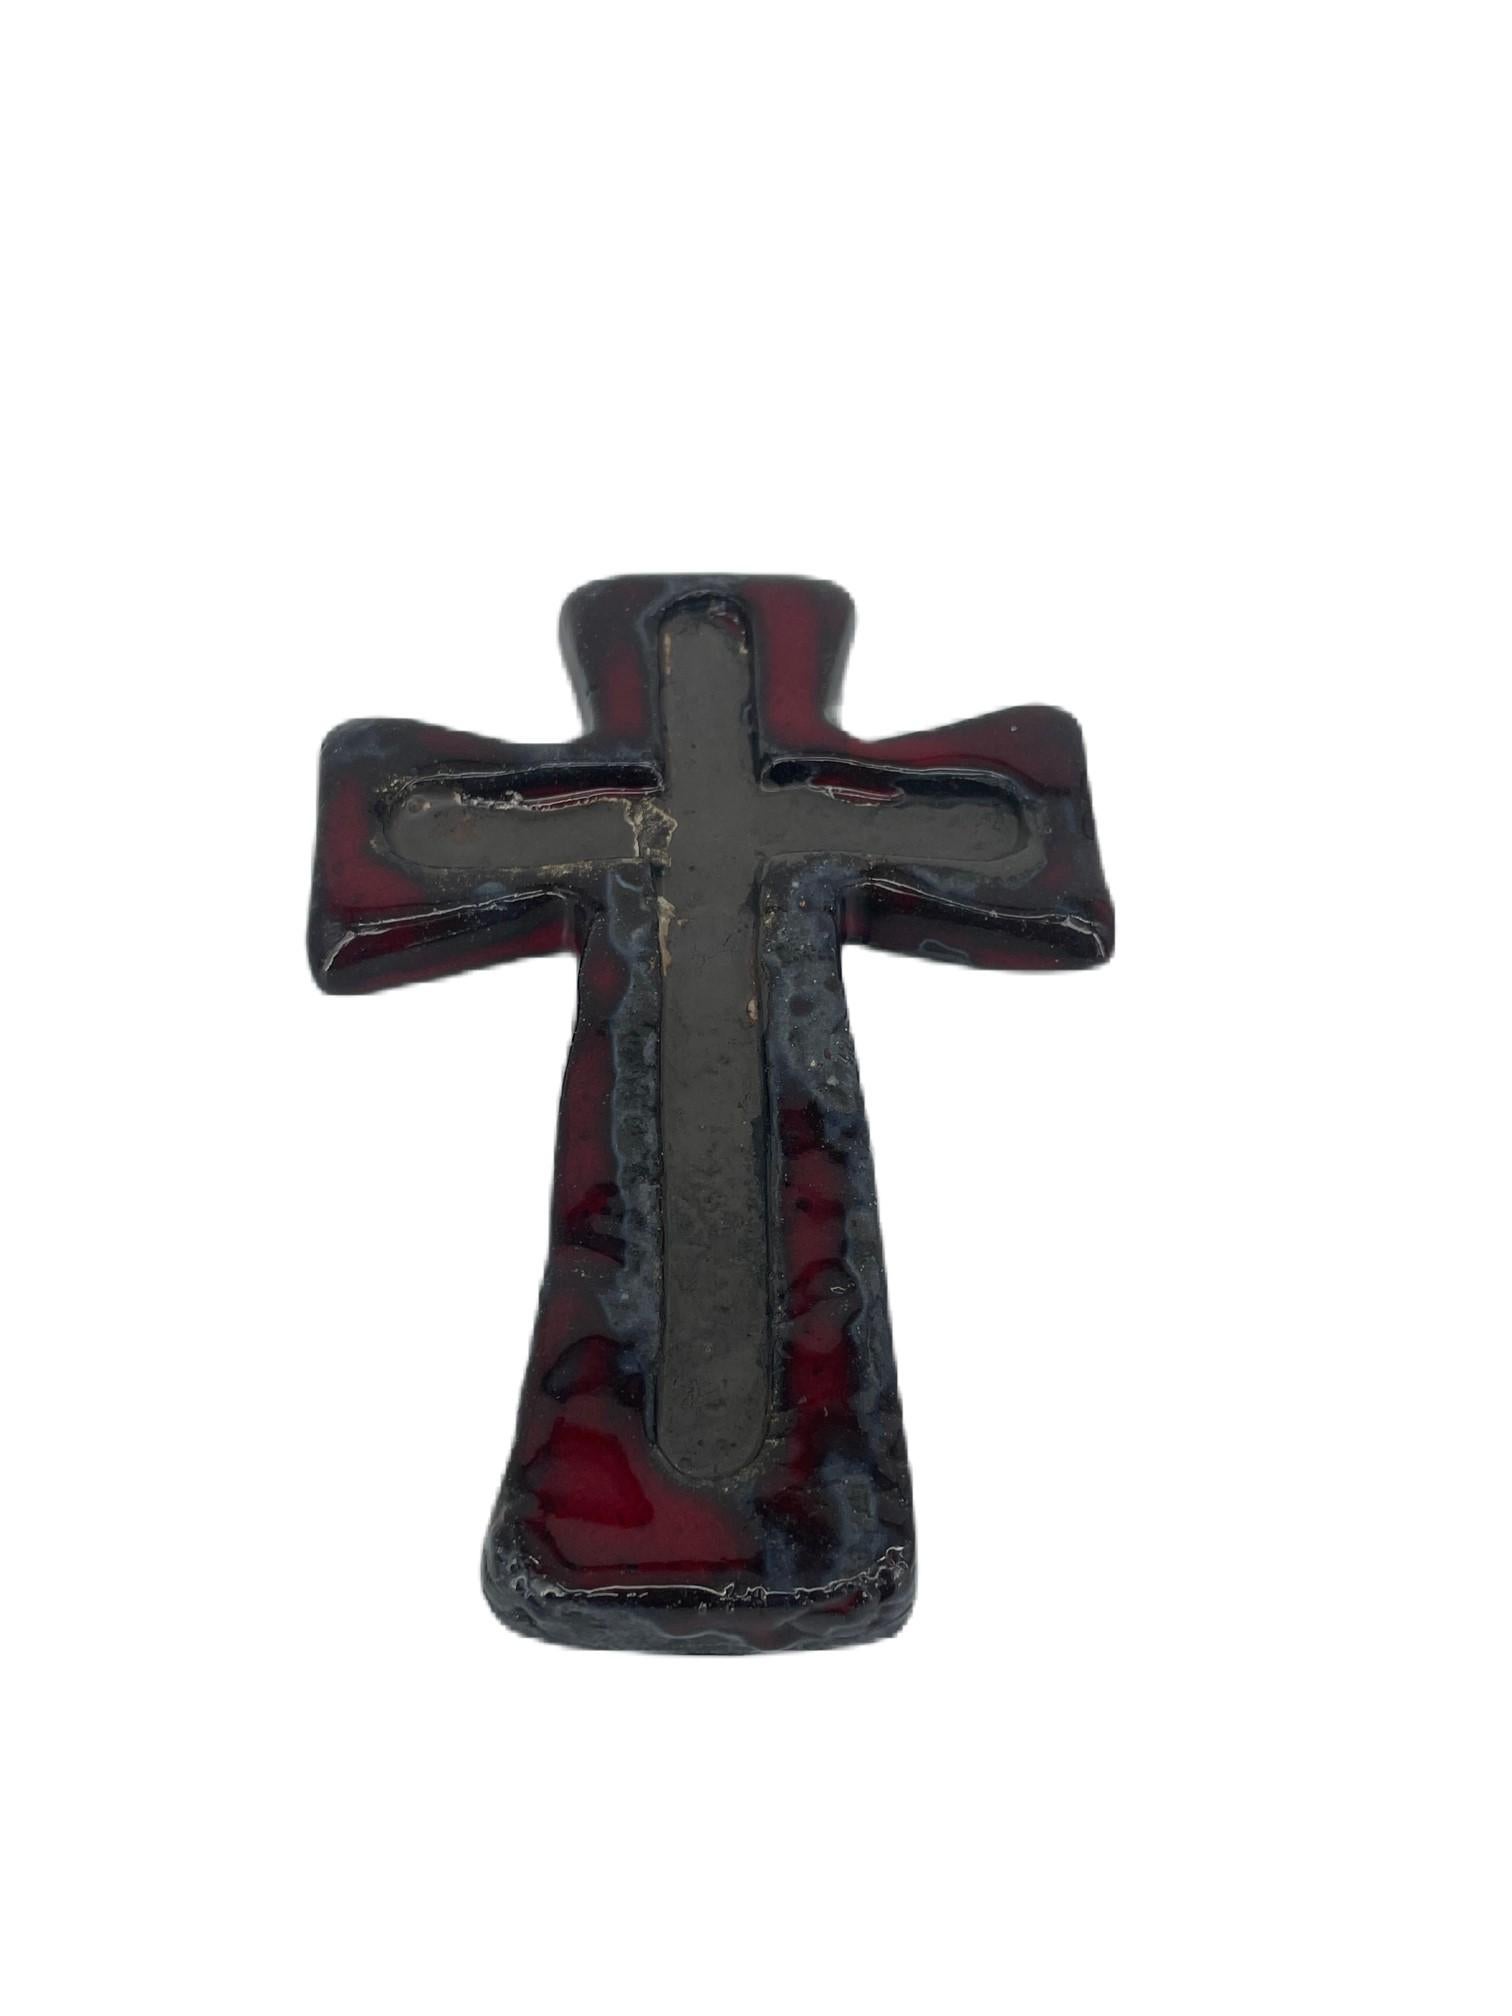 German Crucifix in Red, Black and Grey, Wall Hanging. 1970s Ceramic Cross Fat Lava For Sale